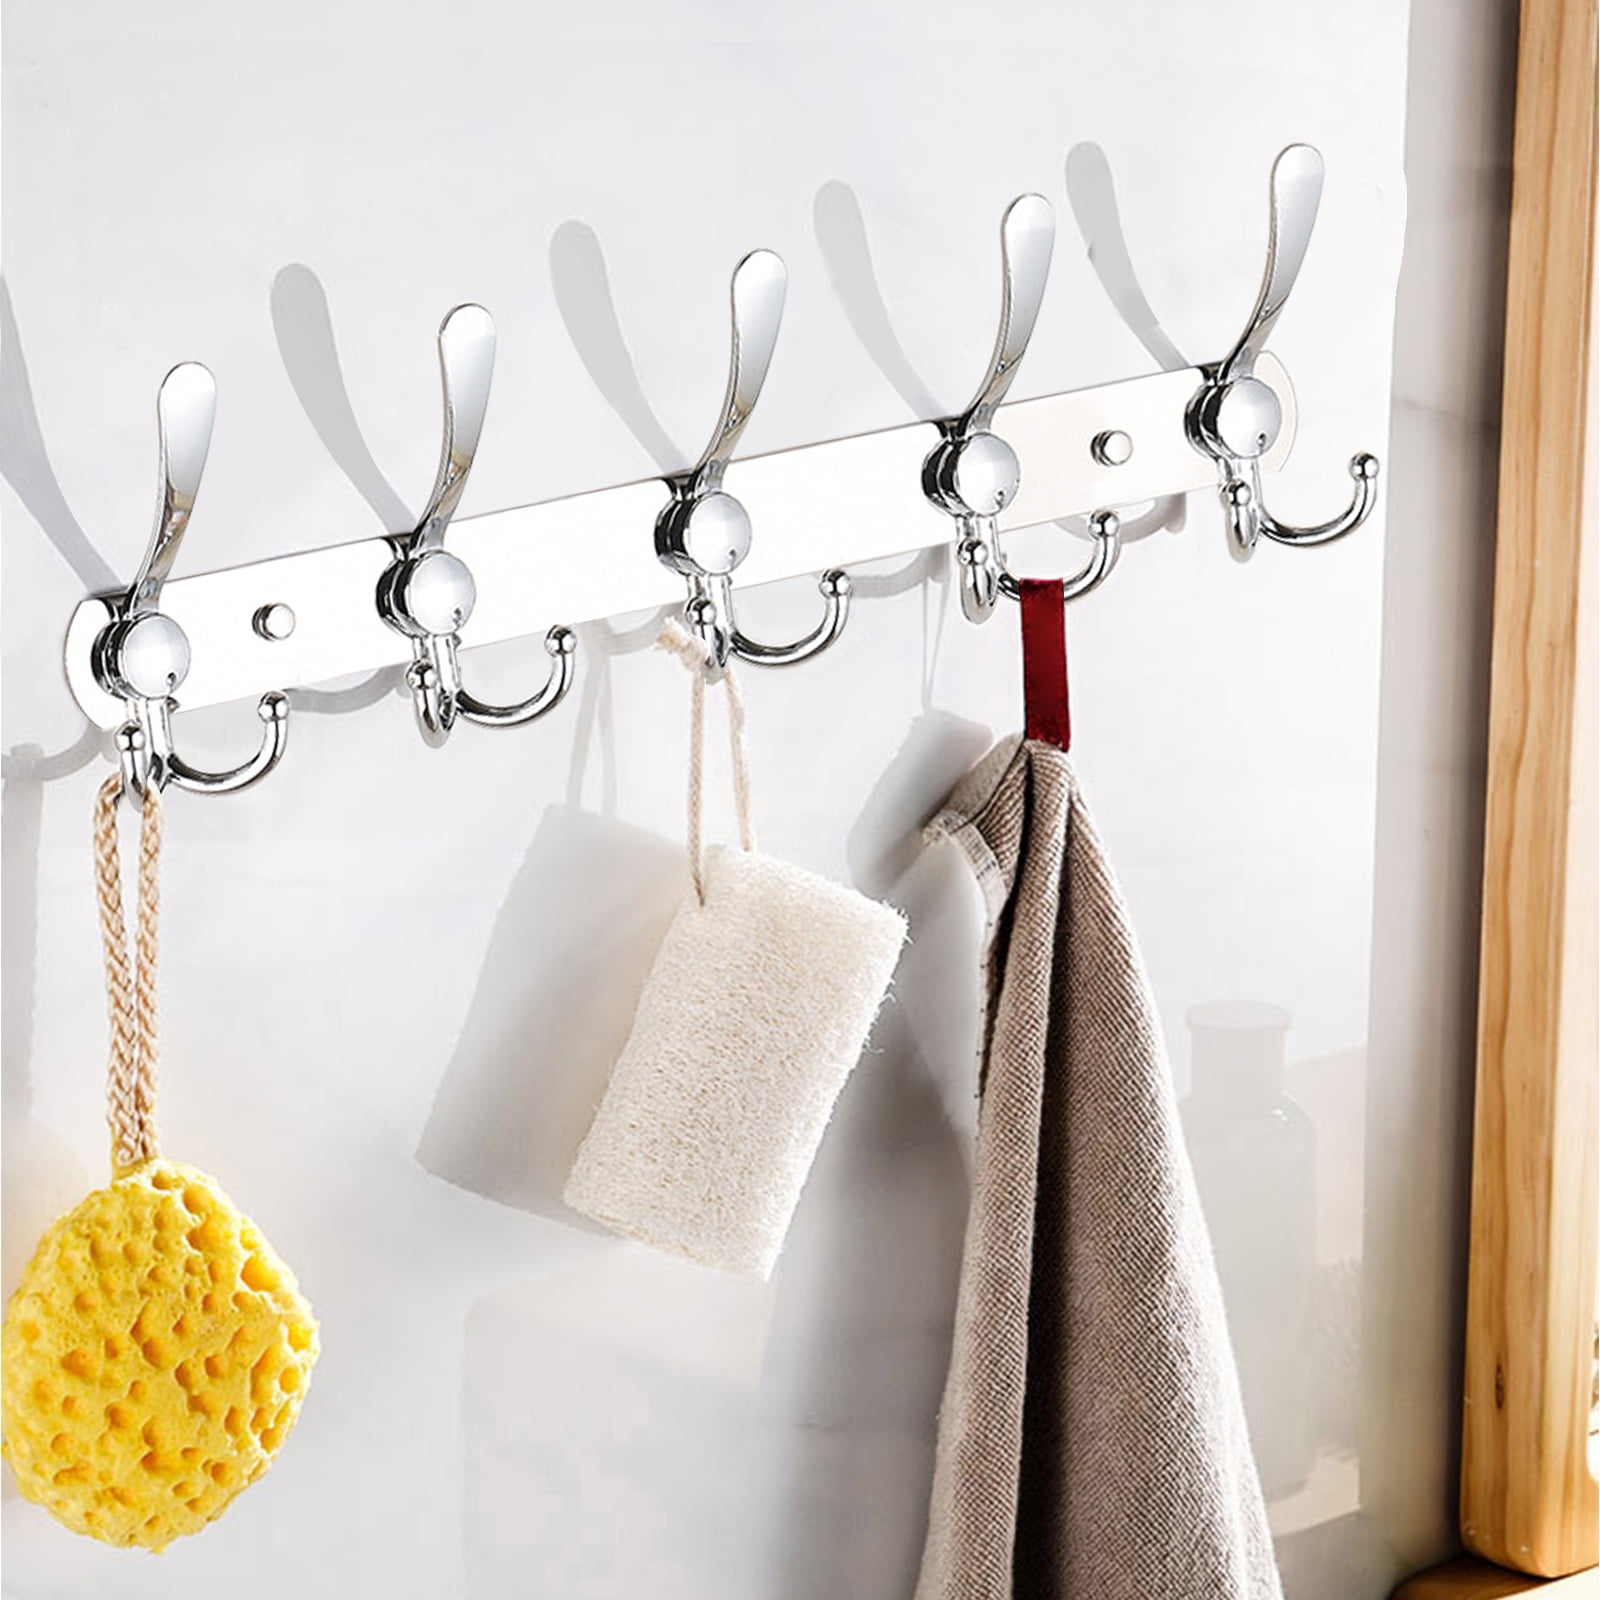 1 to 15 Hooks Stainless Steel Coat Robe Hat Clothes Wall Mount Hanger Towel Rack 